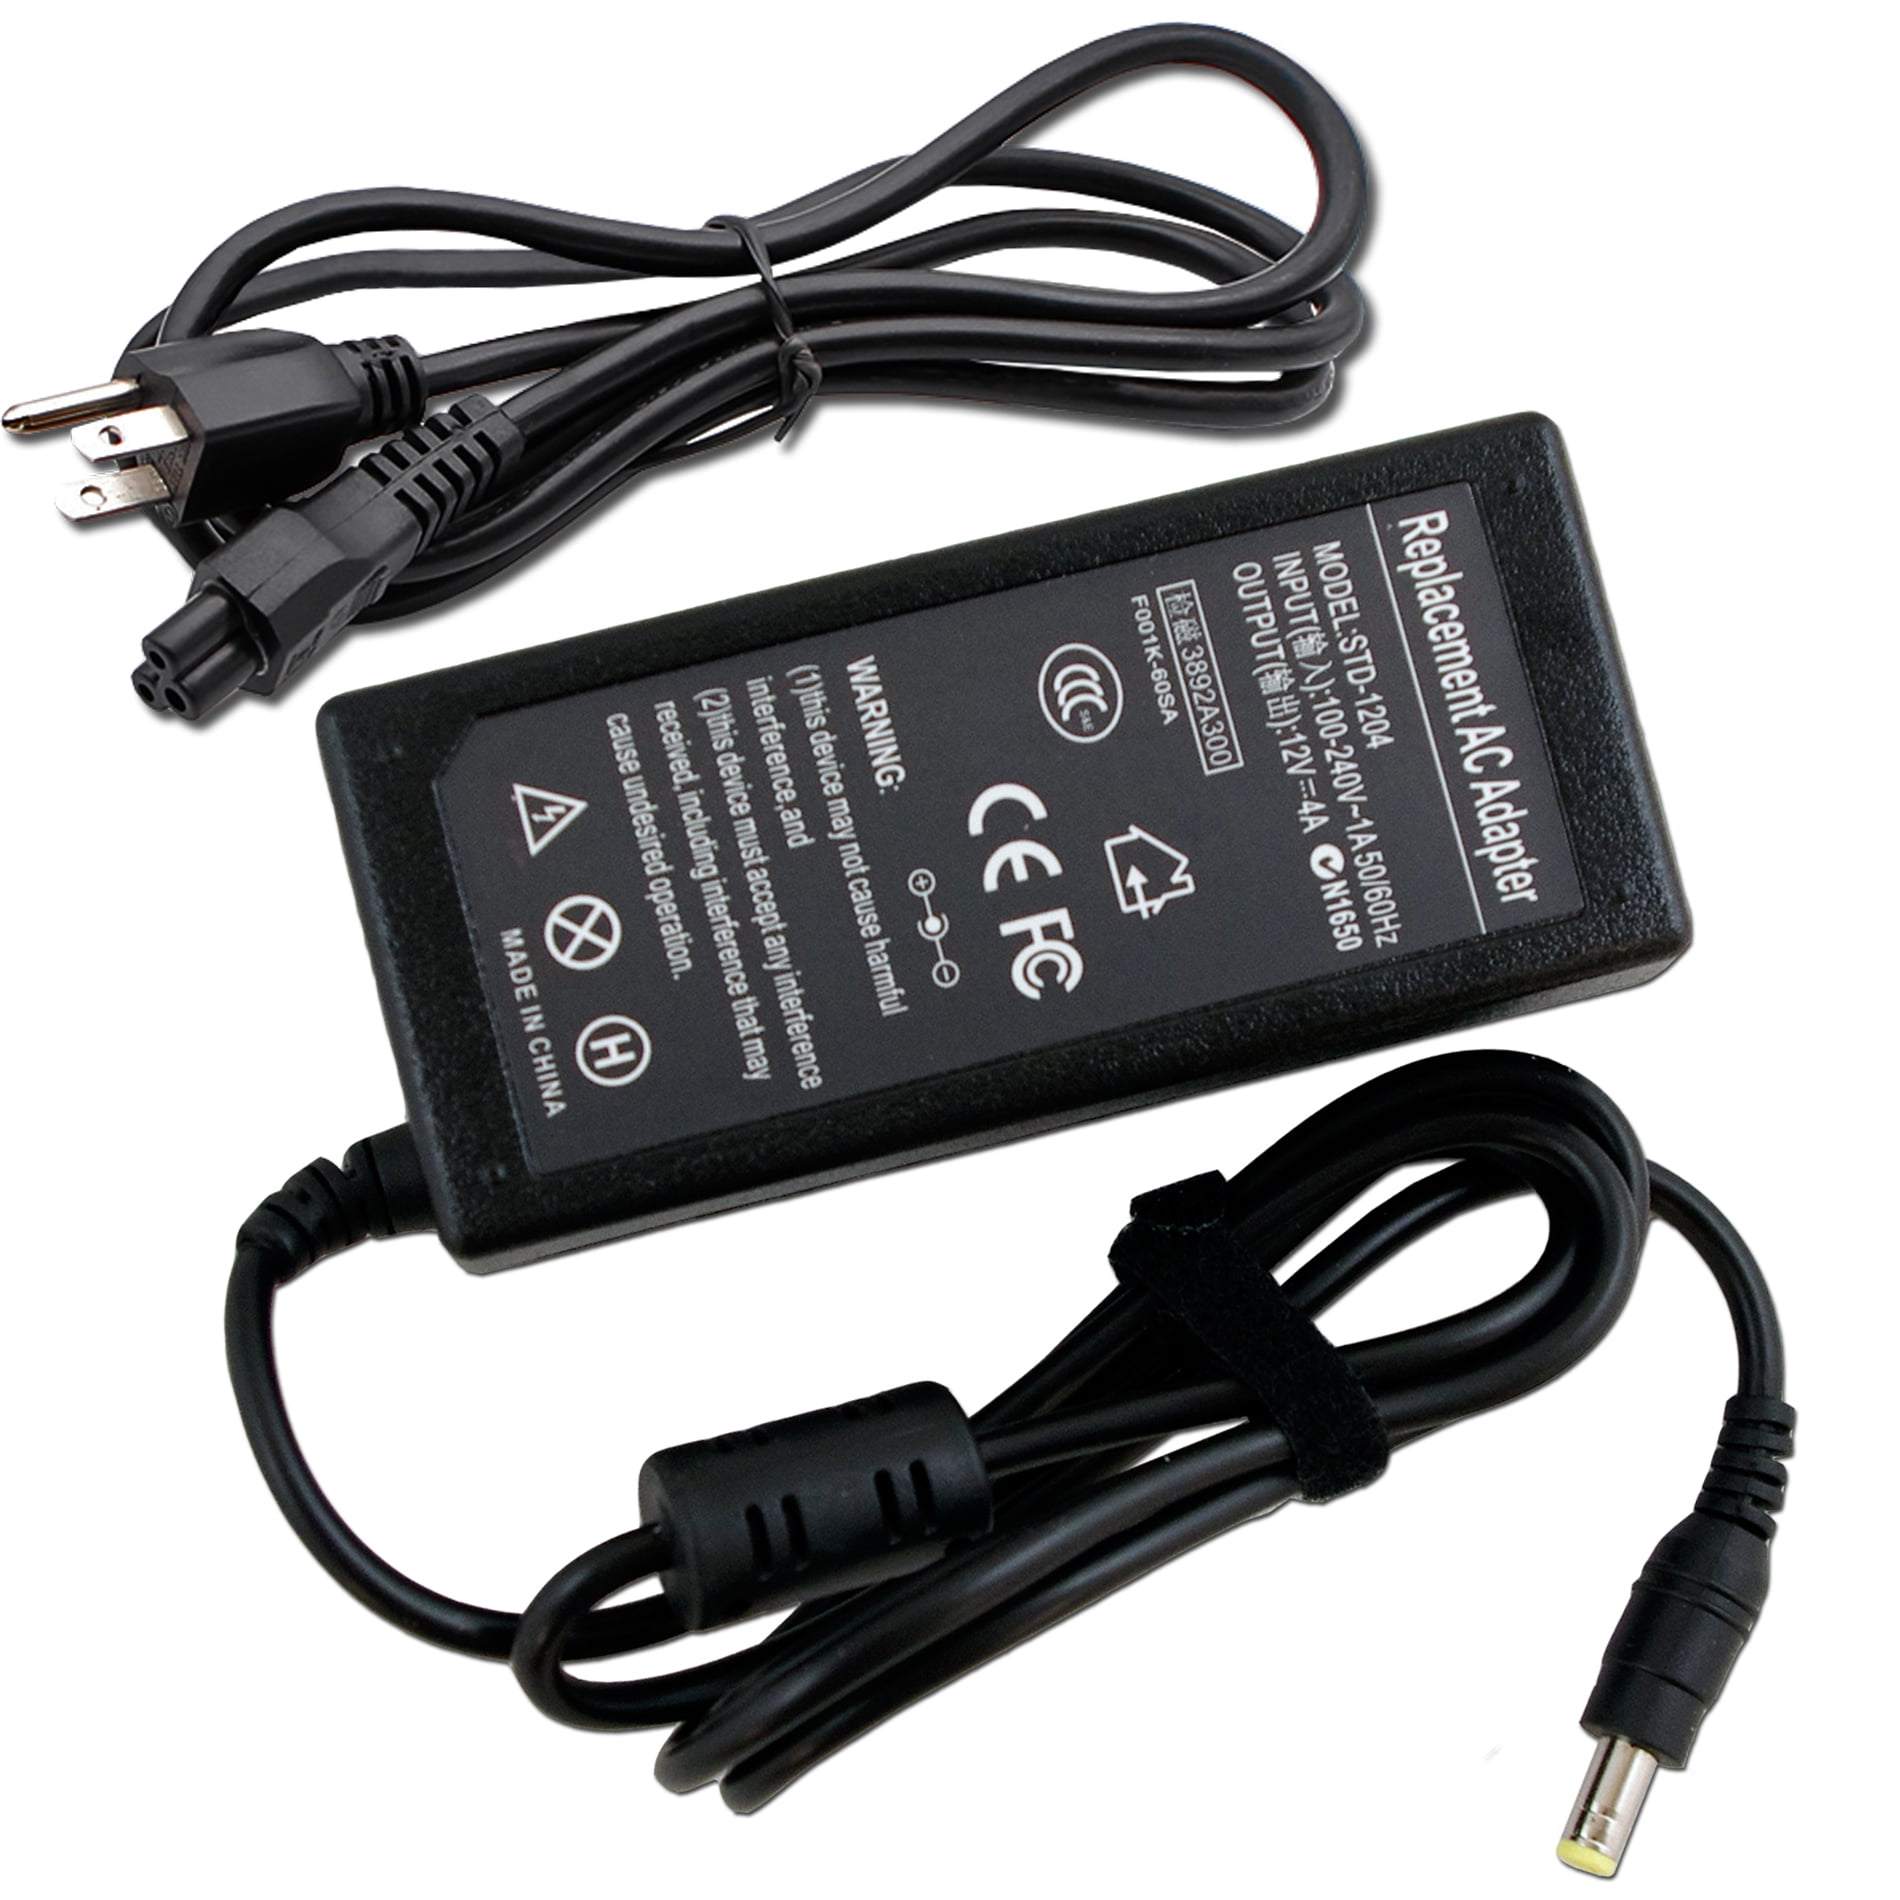 Dell Monitor Power Cable Portugal, SAVE 53% 